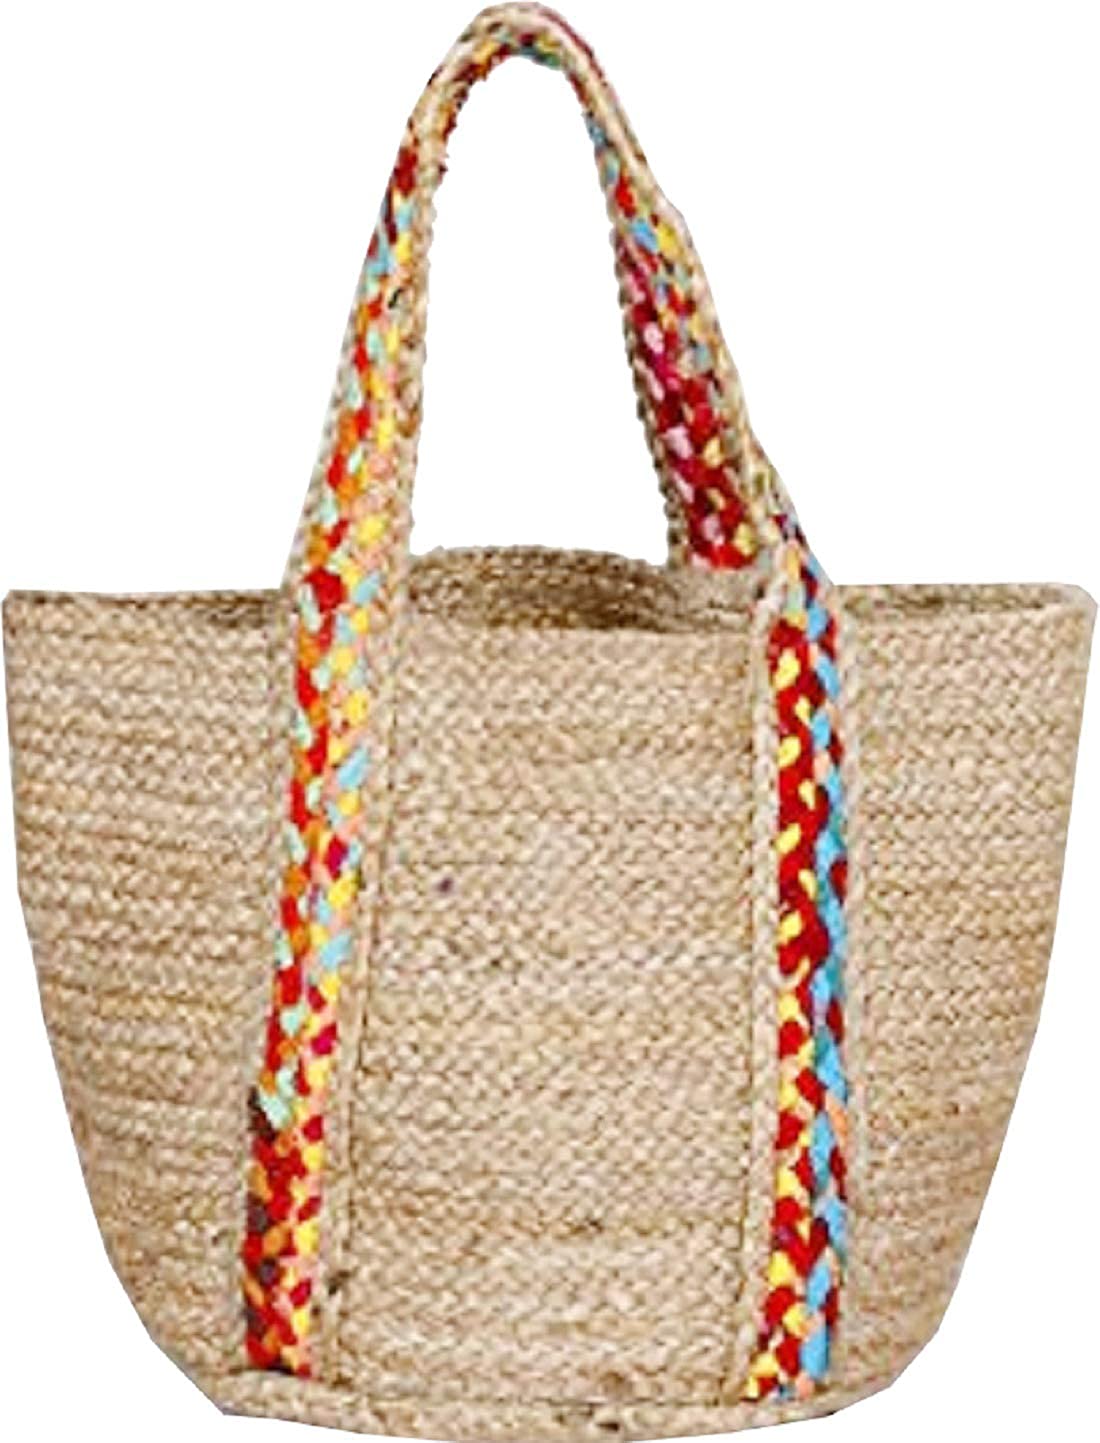 Jute Hand Bag With Chindi Strip Natural Pure White Jute Bag With Flower DesignHand Made Jute Bag